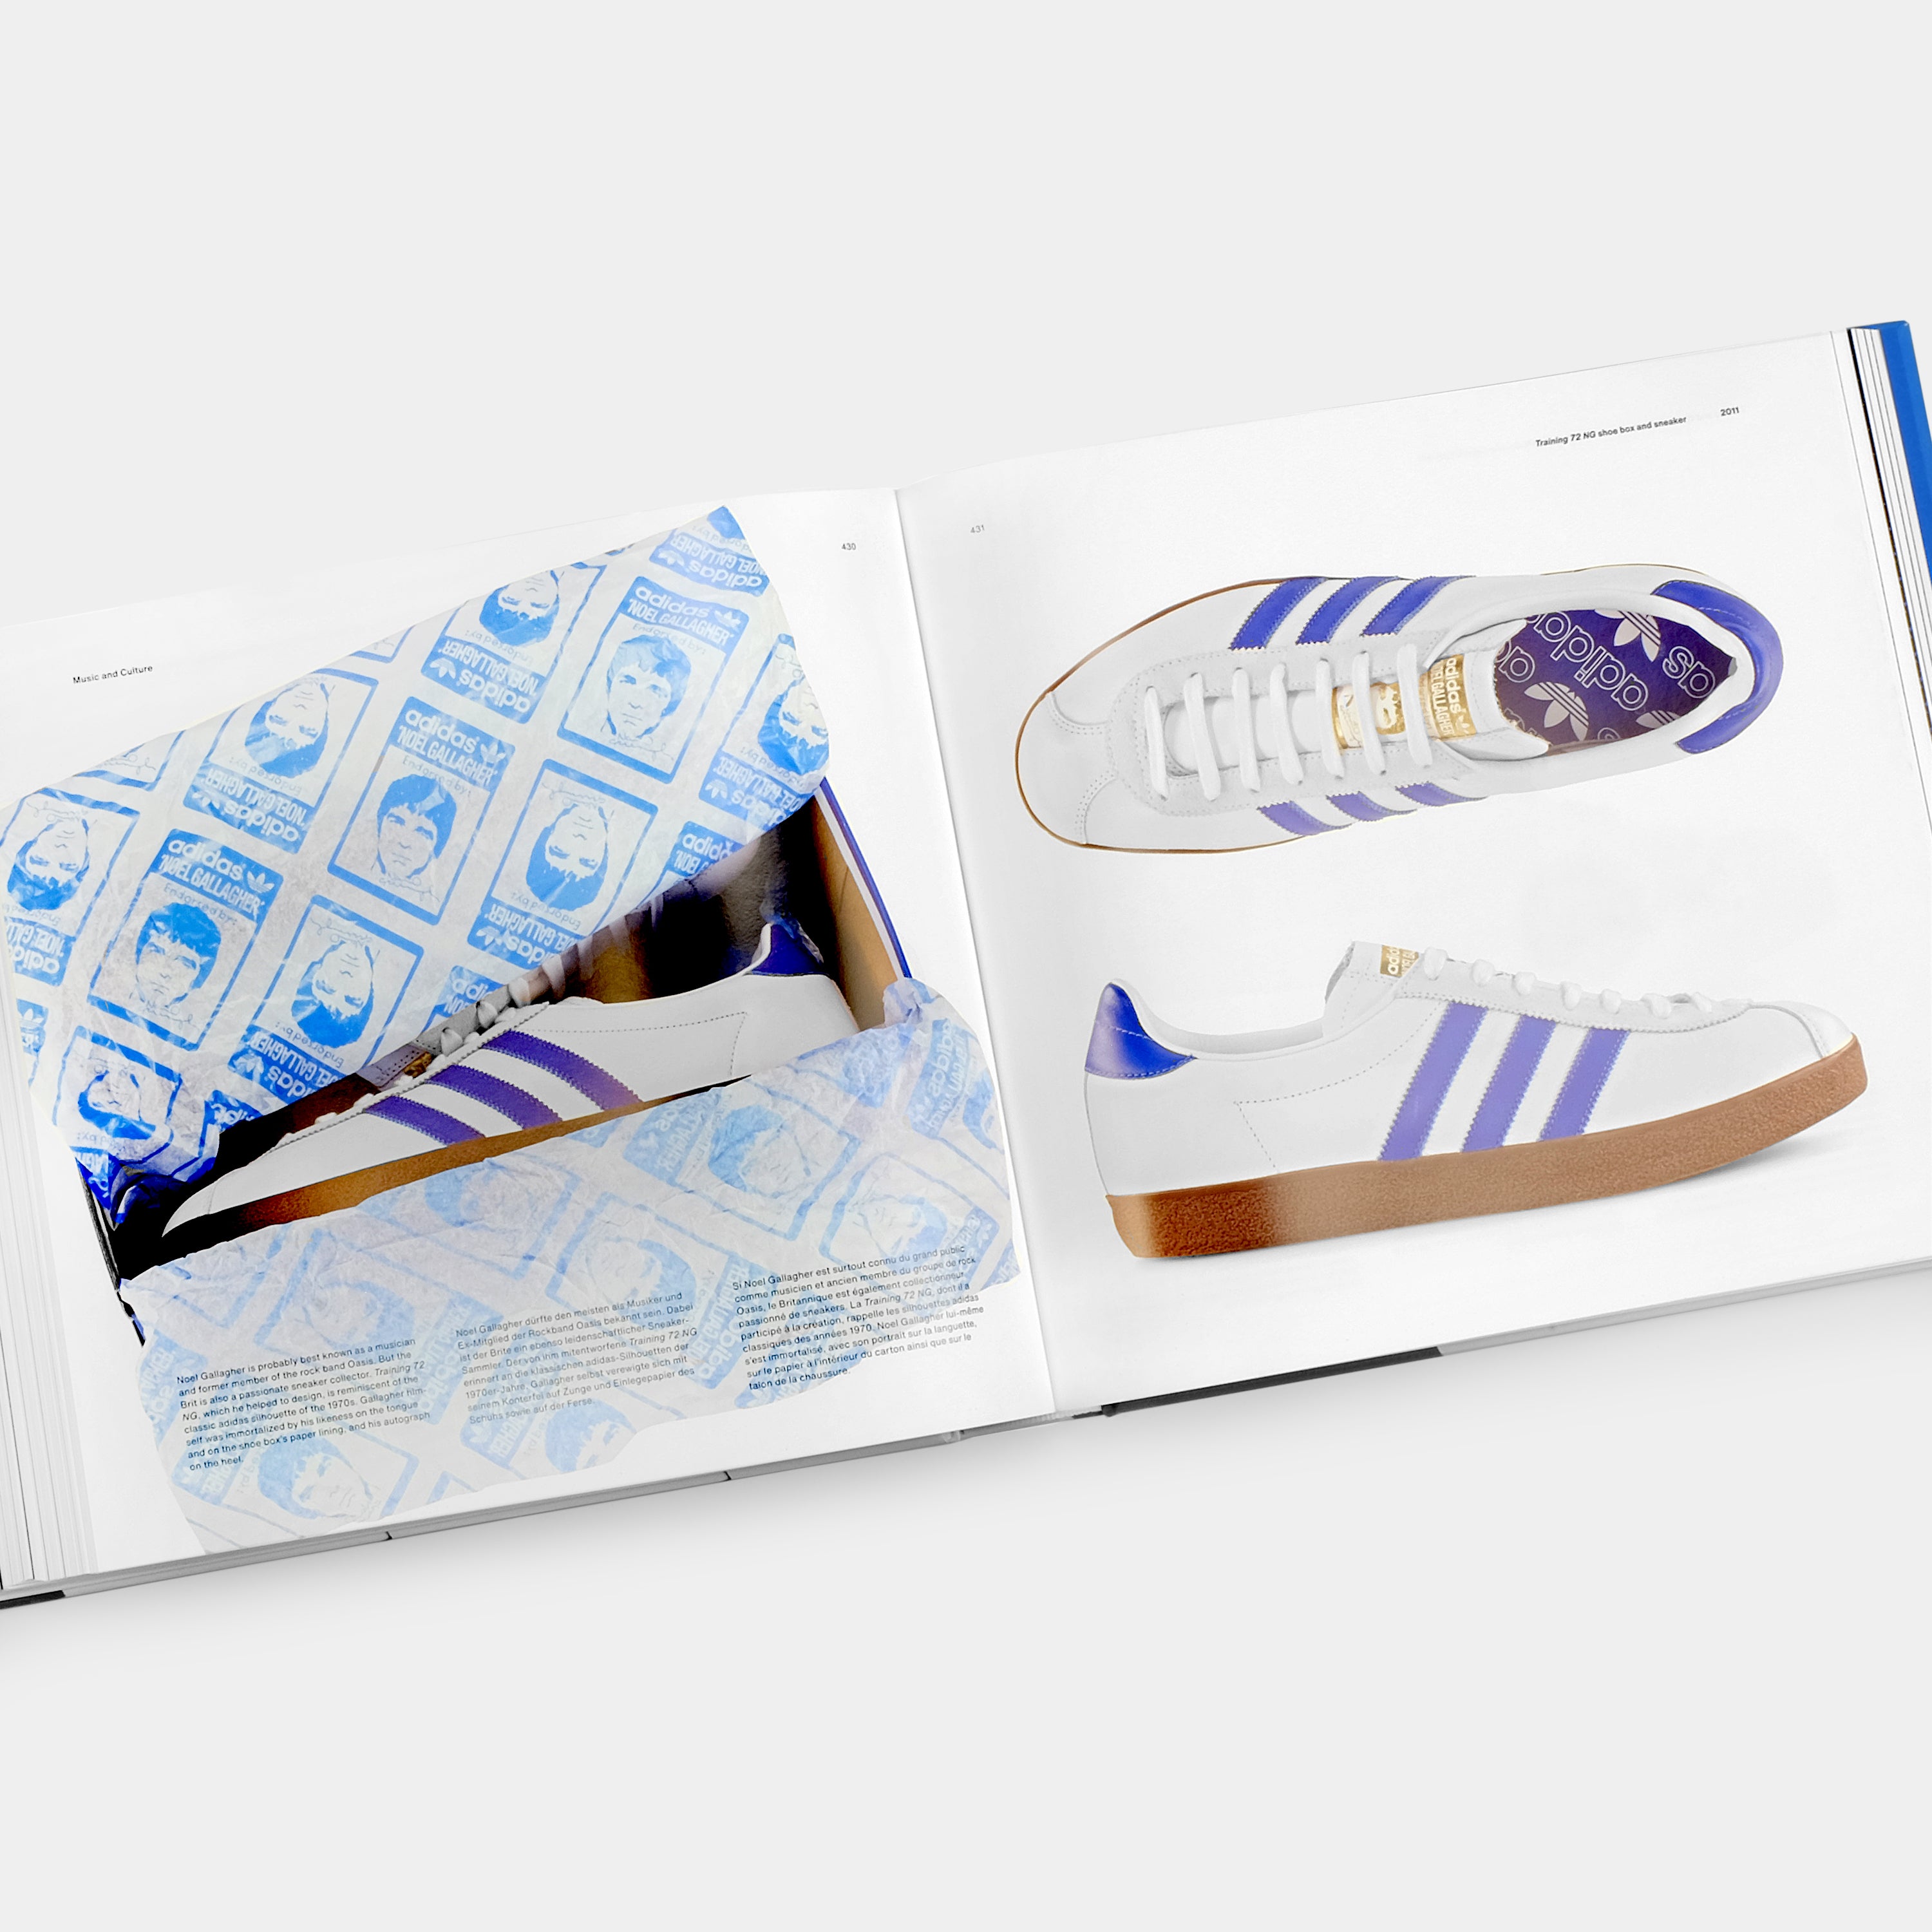 TASCHEN Books: The adidas Archive. The Footwear Collection